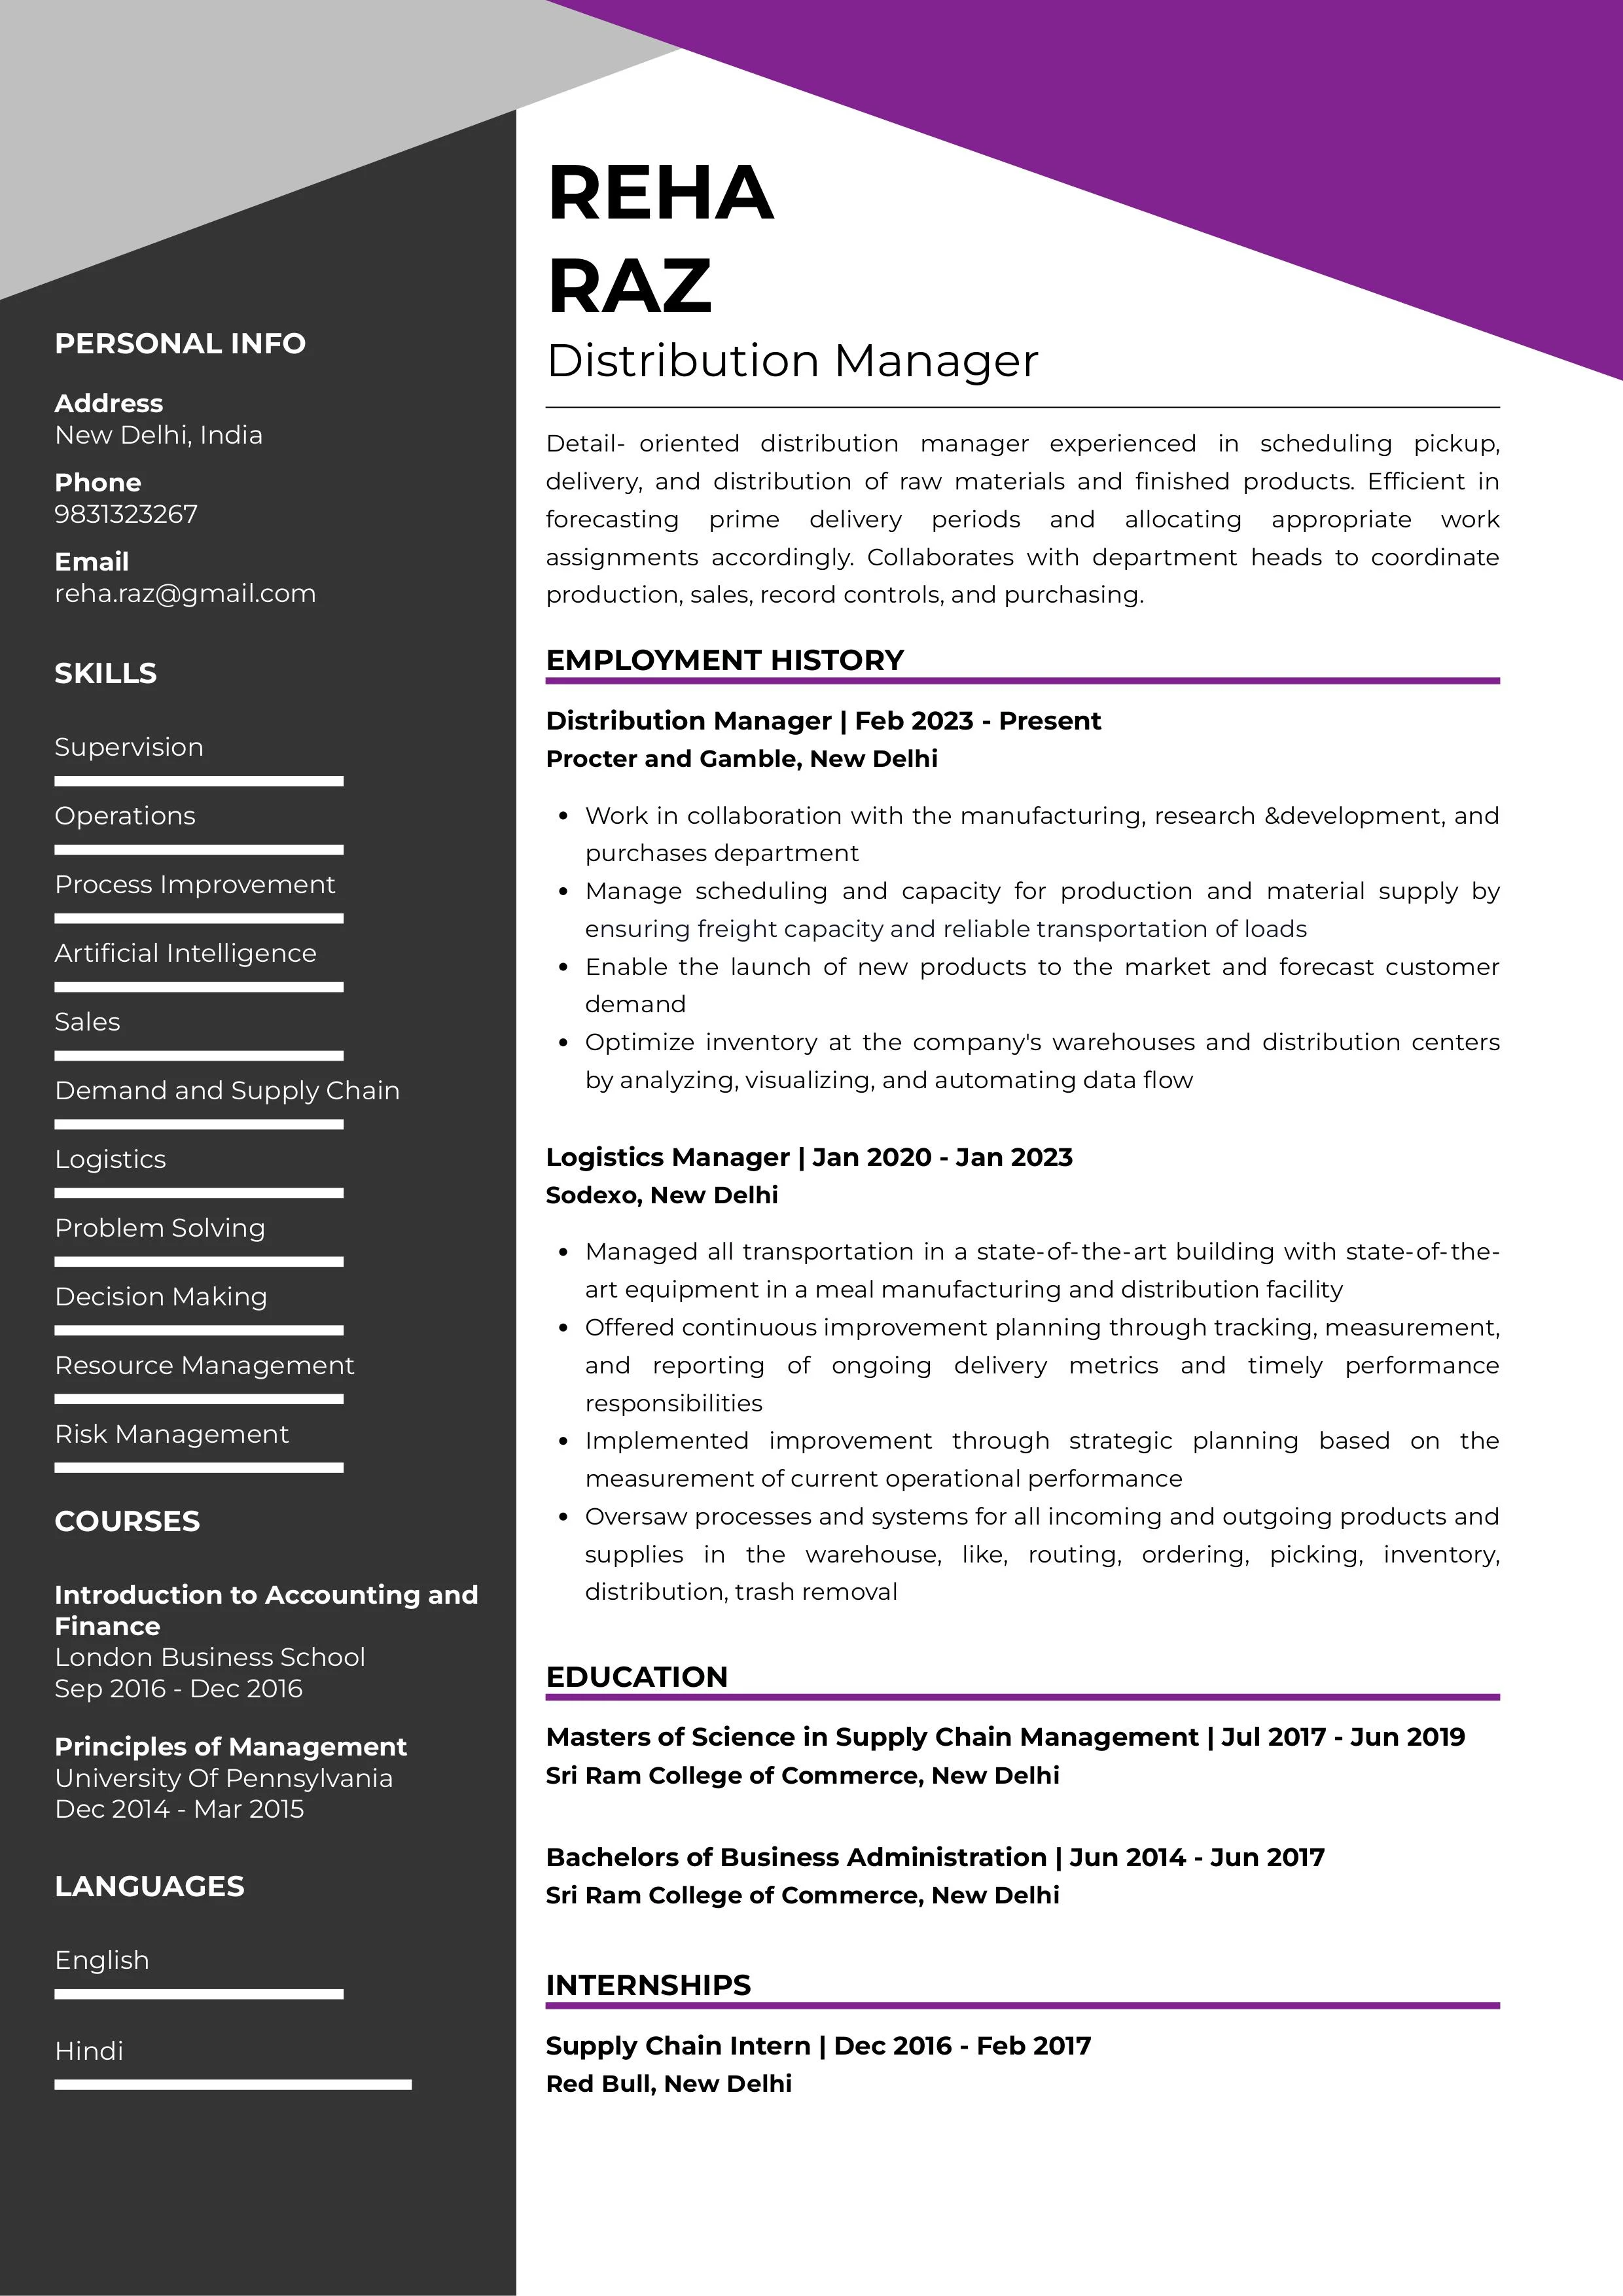 Sample Resume of Distribution Manager | Free Resume Templates & Samples on Resumod.co